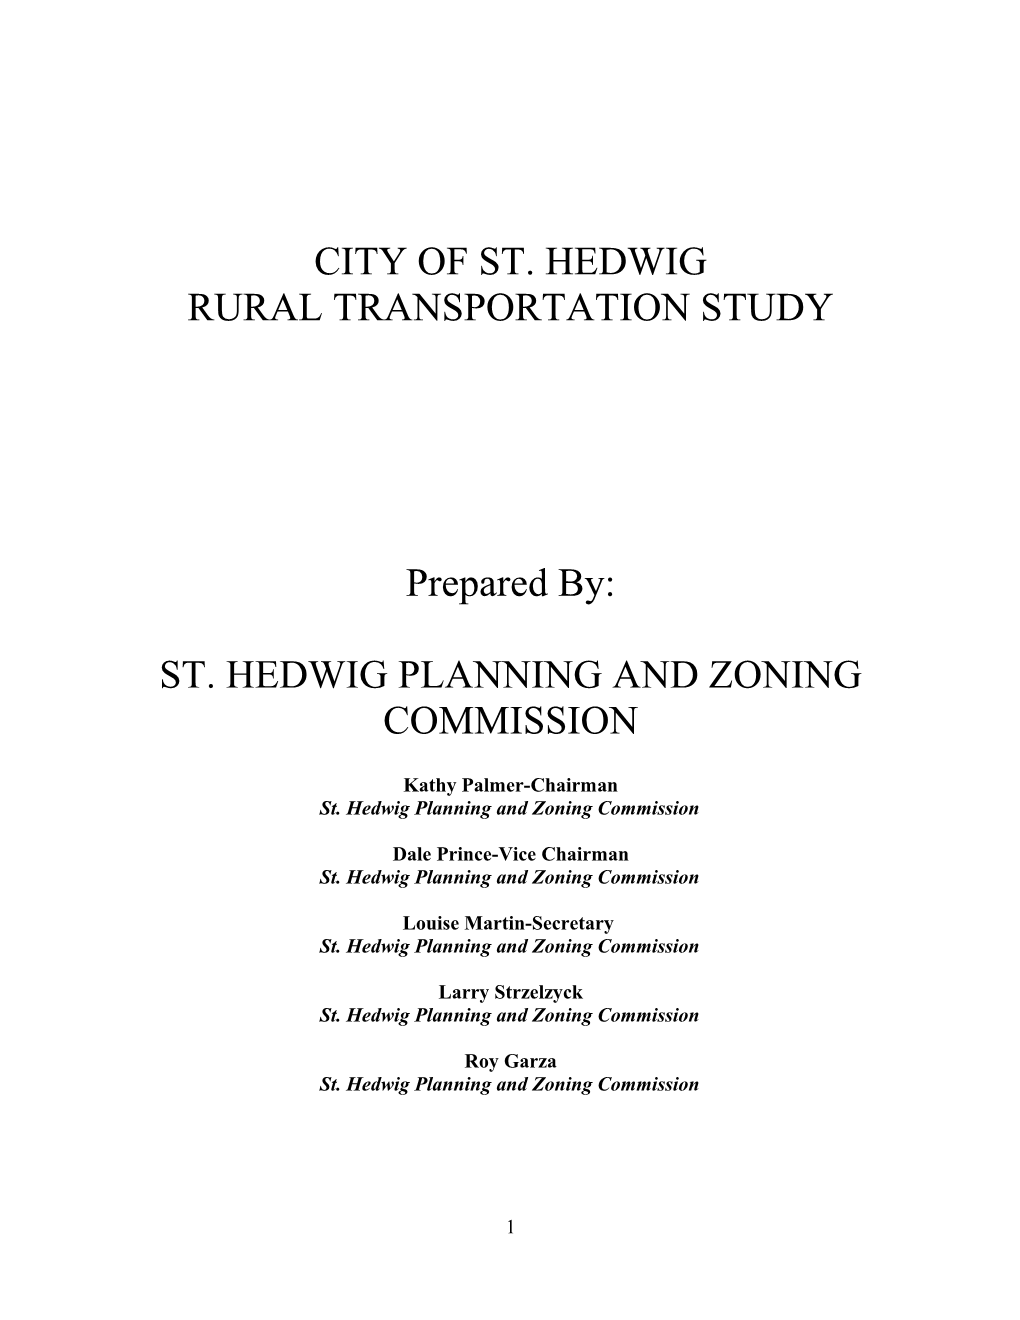 St. Hedwig Planning and Zoning Commission